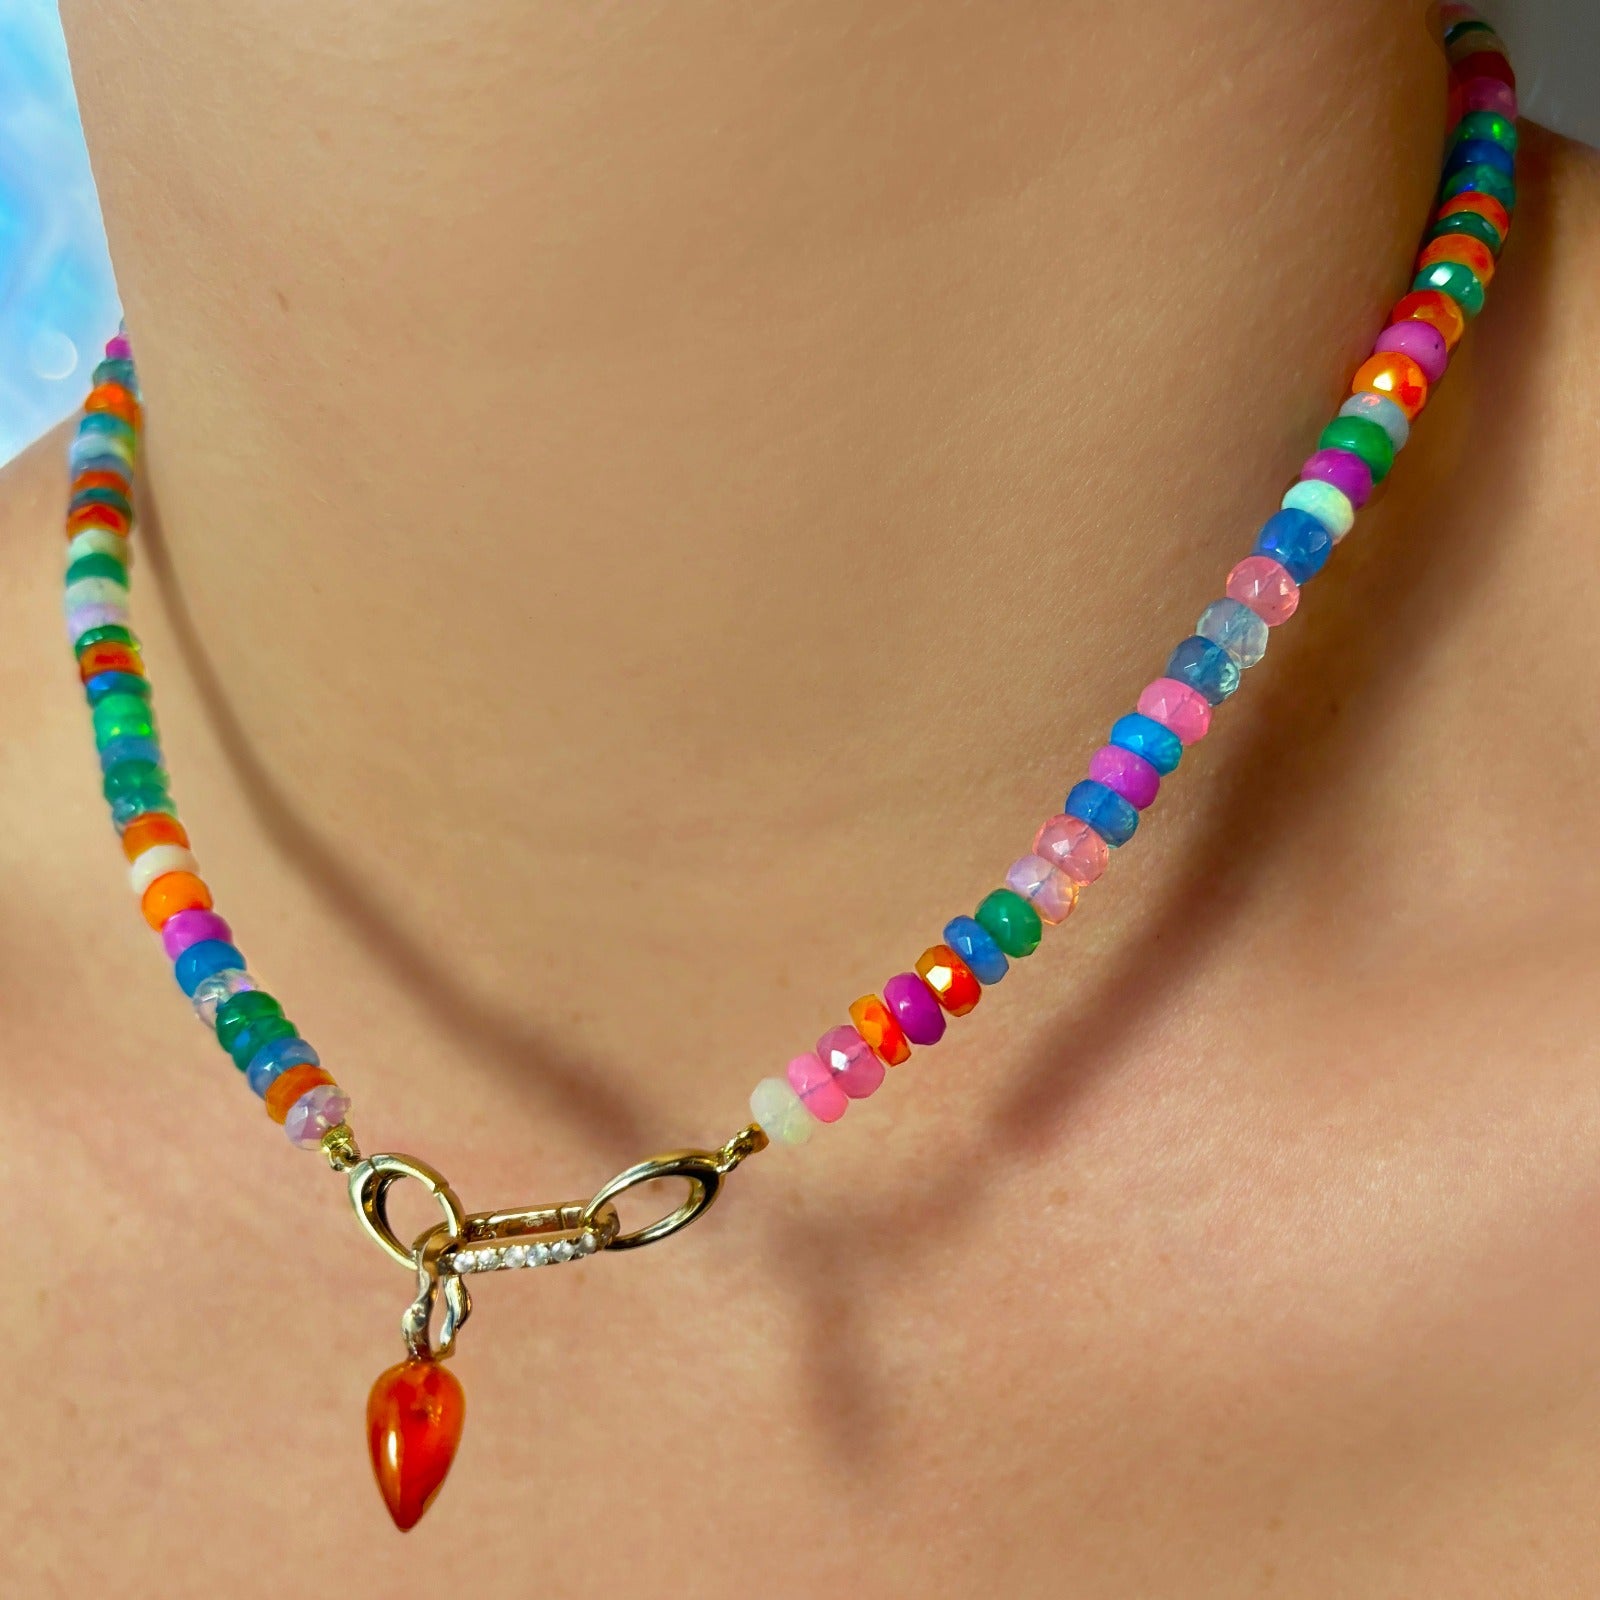 Shimmering beaded necklace made of faceted opals in shades of fiery blues, yellows, teal, and purple on a gold linking ovals clasp. Styled on a neck layered with a small diamond charm lock and acorn drop charm.